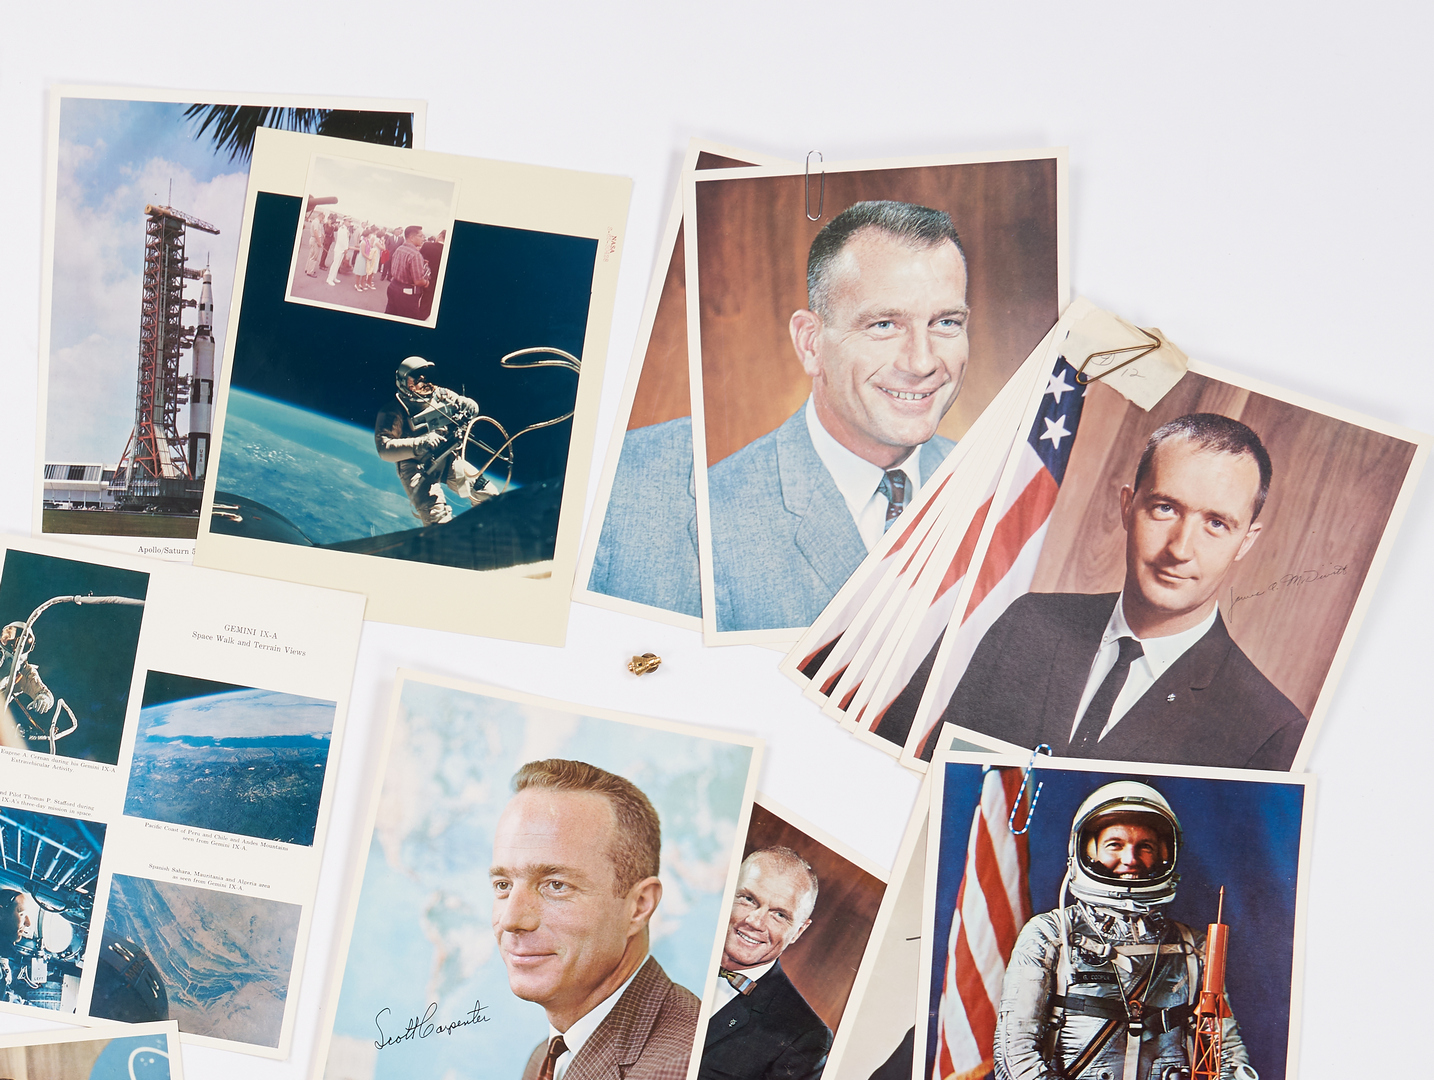 Lot 724: NASA Astronaut Related Archive with autographs, 89 items